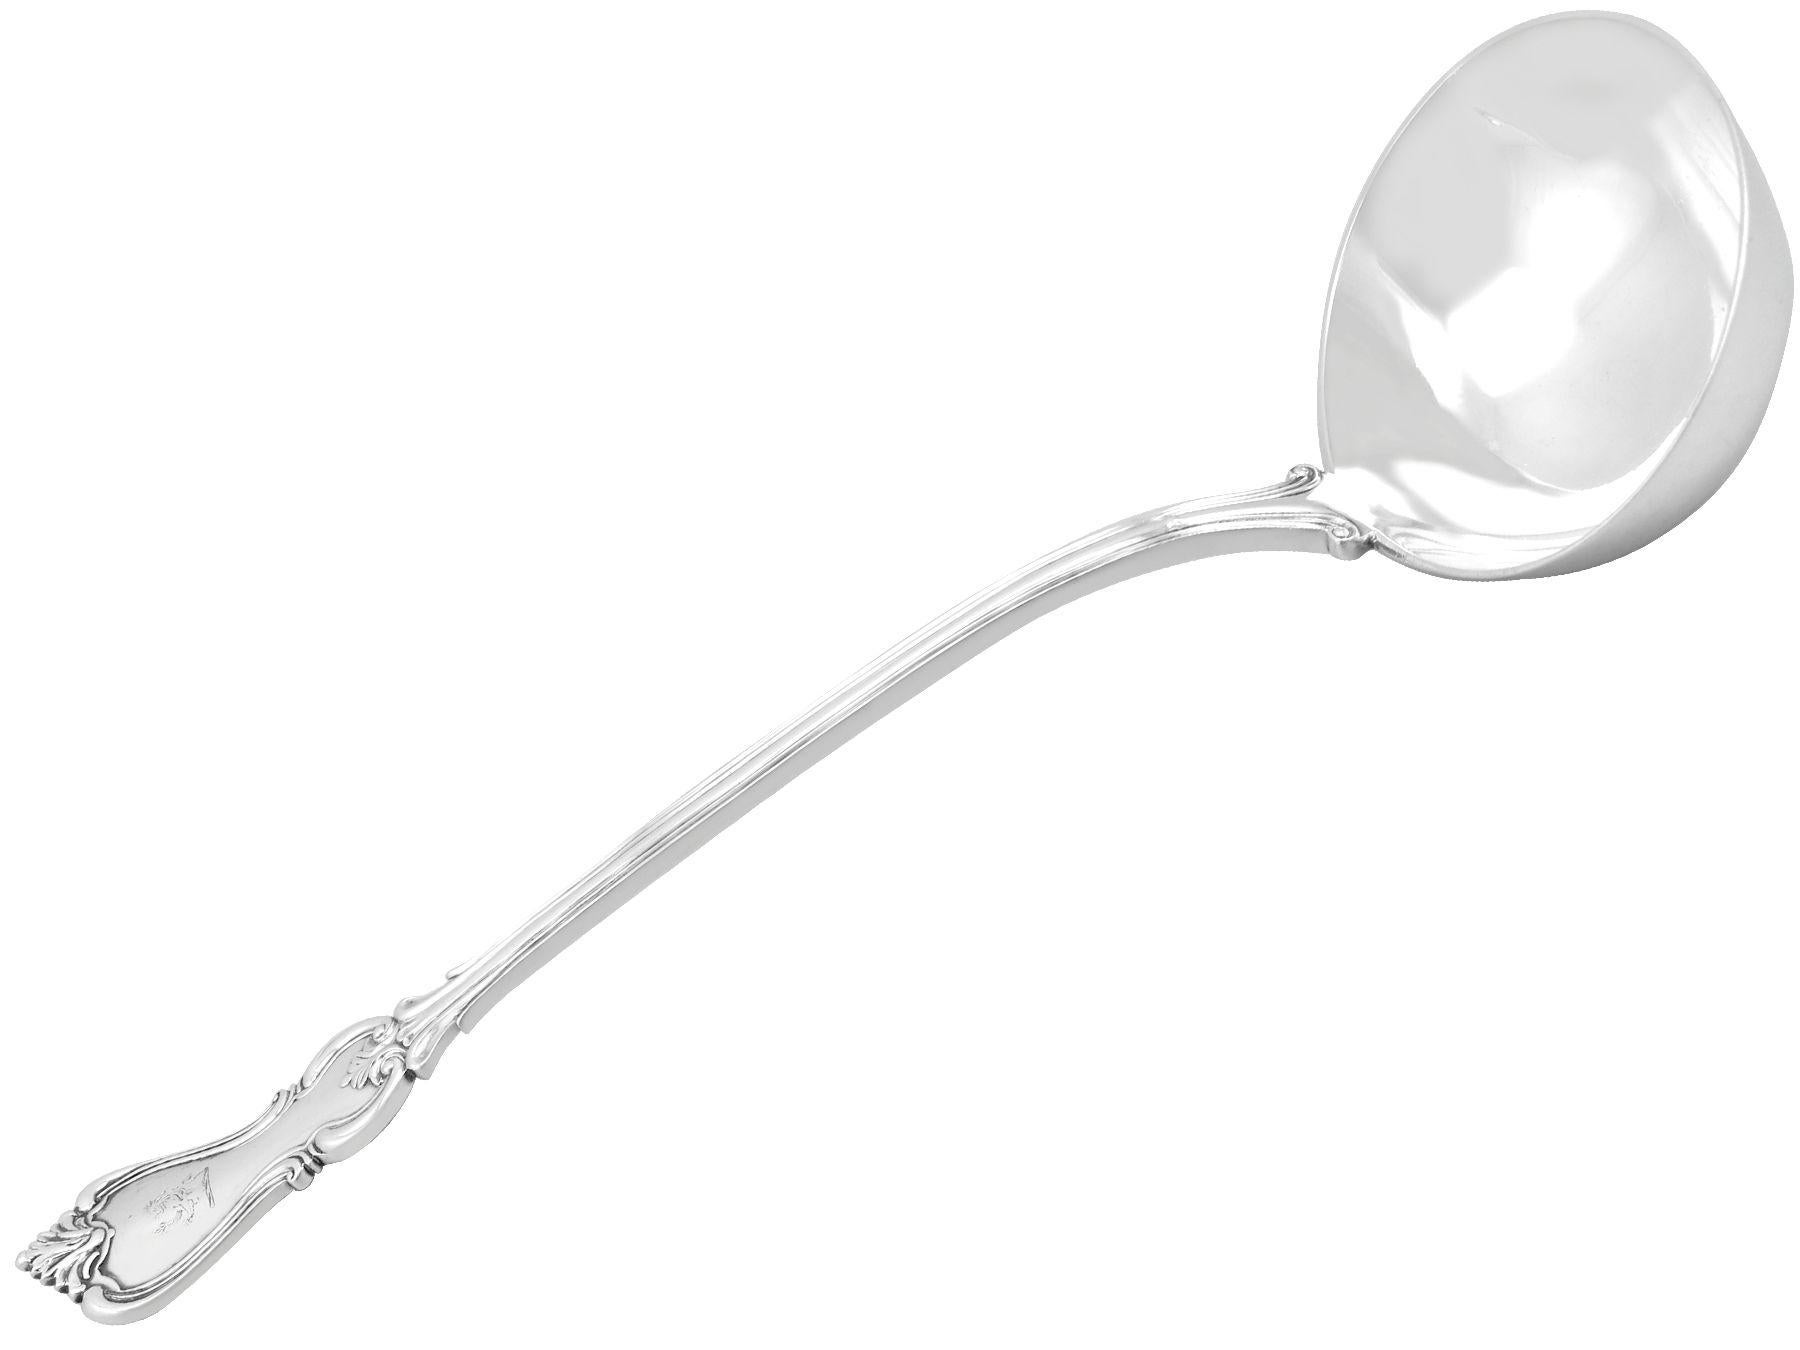 An exceptional, fine and impressive antique Victorian English sterling silver soup ladle; an addition to our silver cutlery collection

This exceptional antique Victorian sterling silver soup ladle has been crafted in the Albert pattern.

The